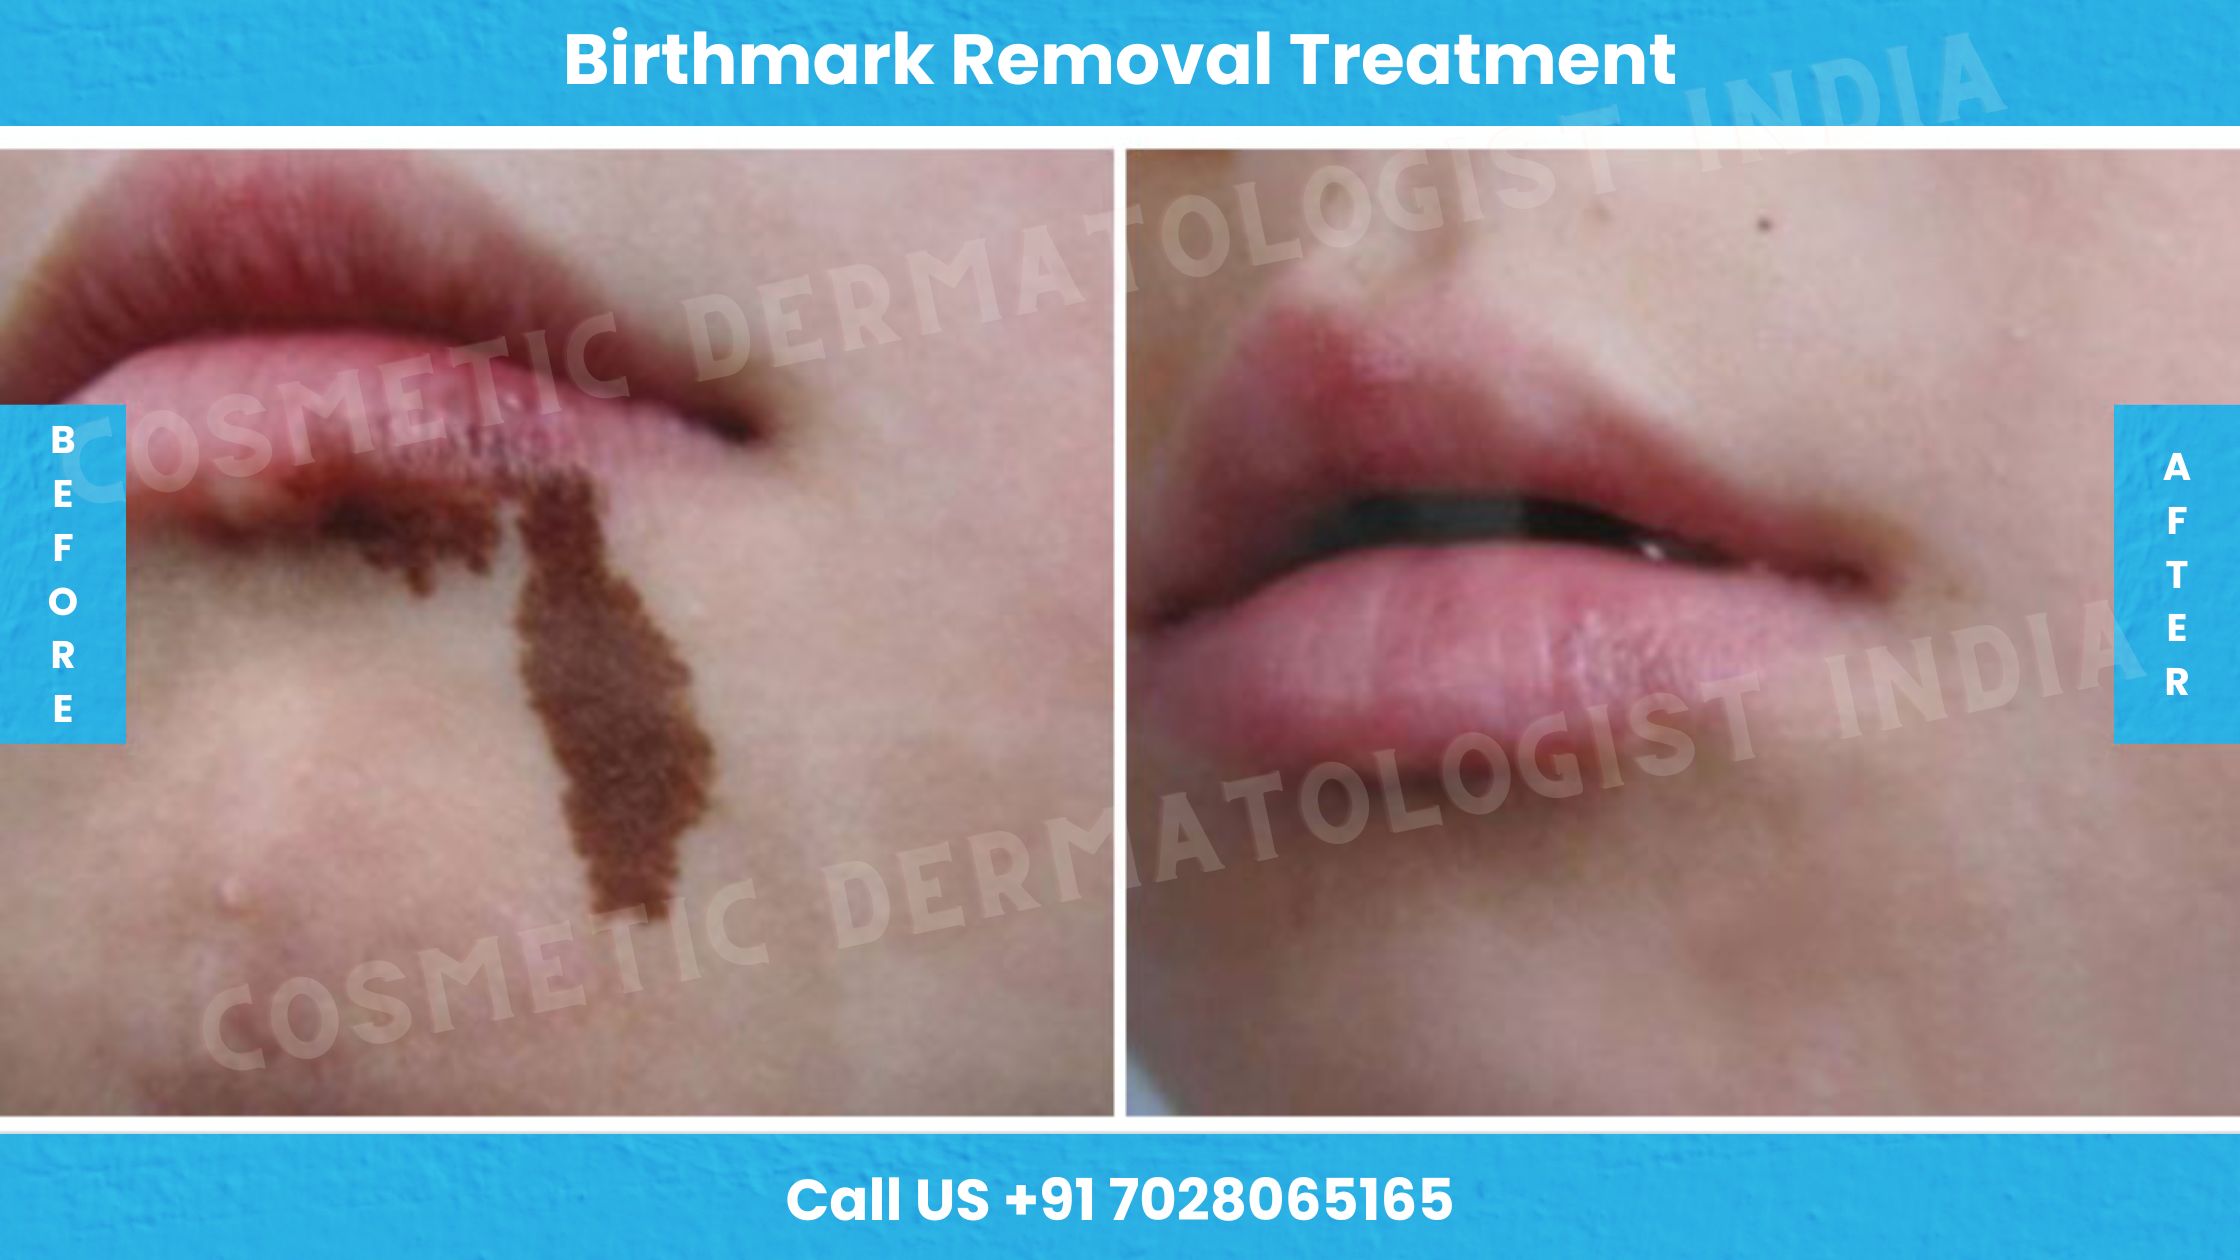 Before and After Images of Birthmark Removal Treatment